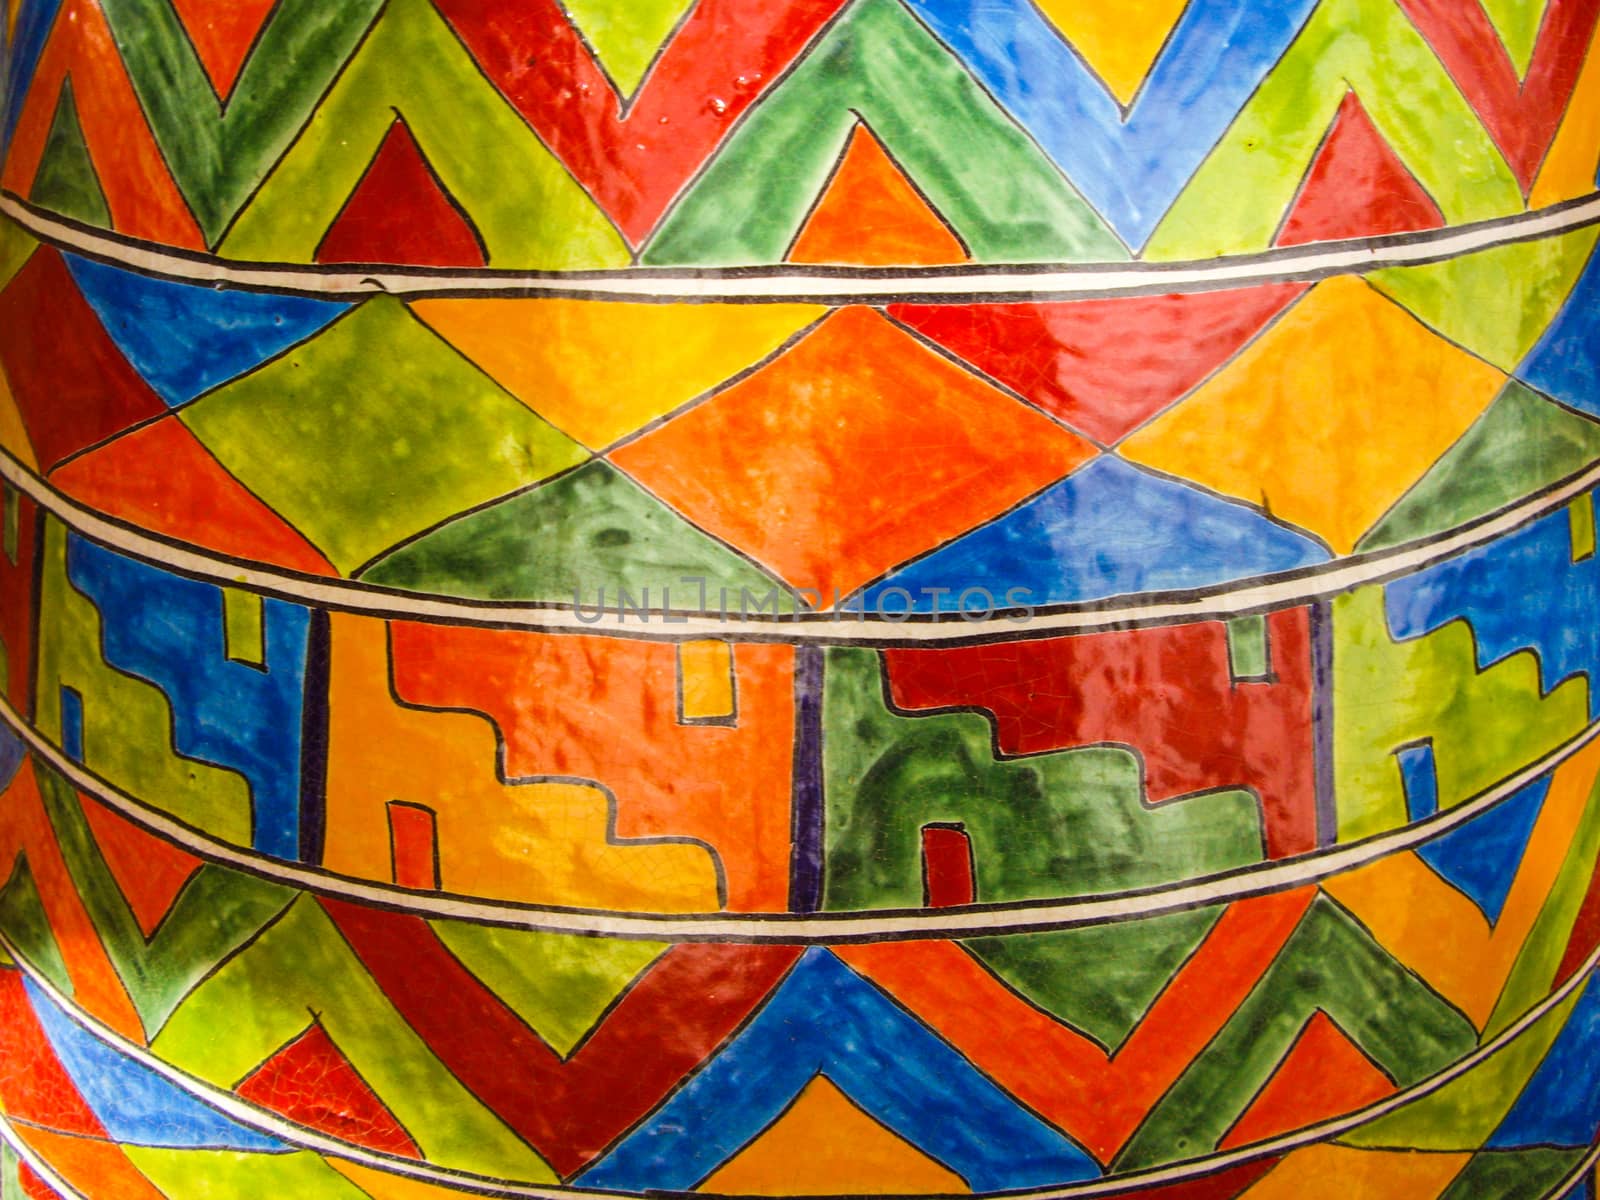 Southwest design on Mexican pottery by emattil